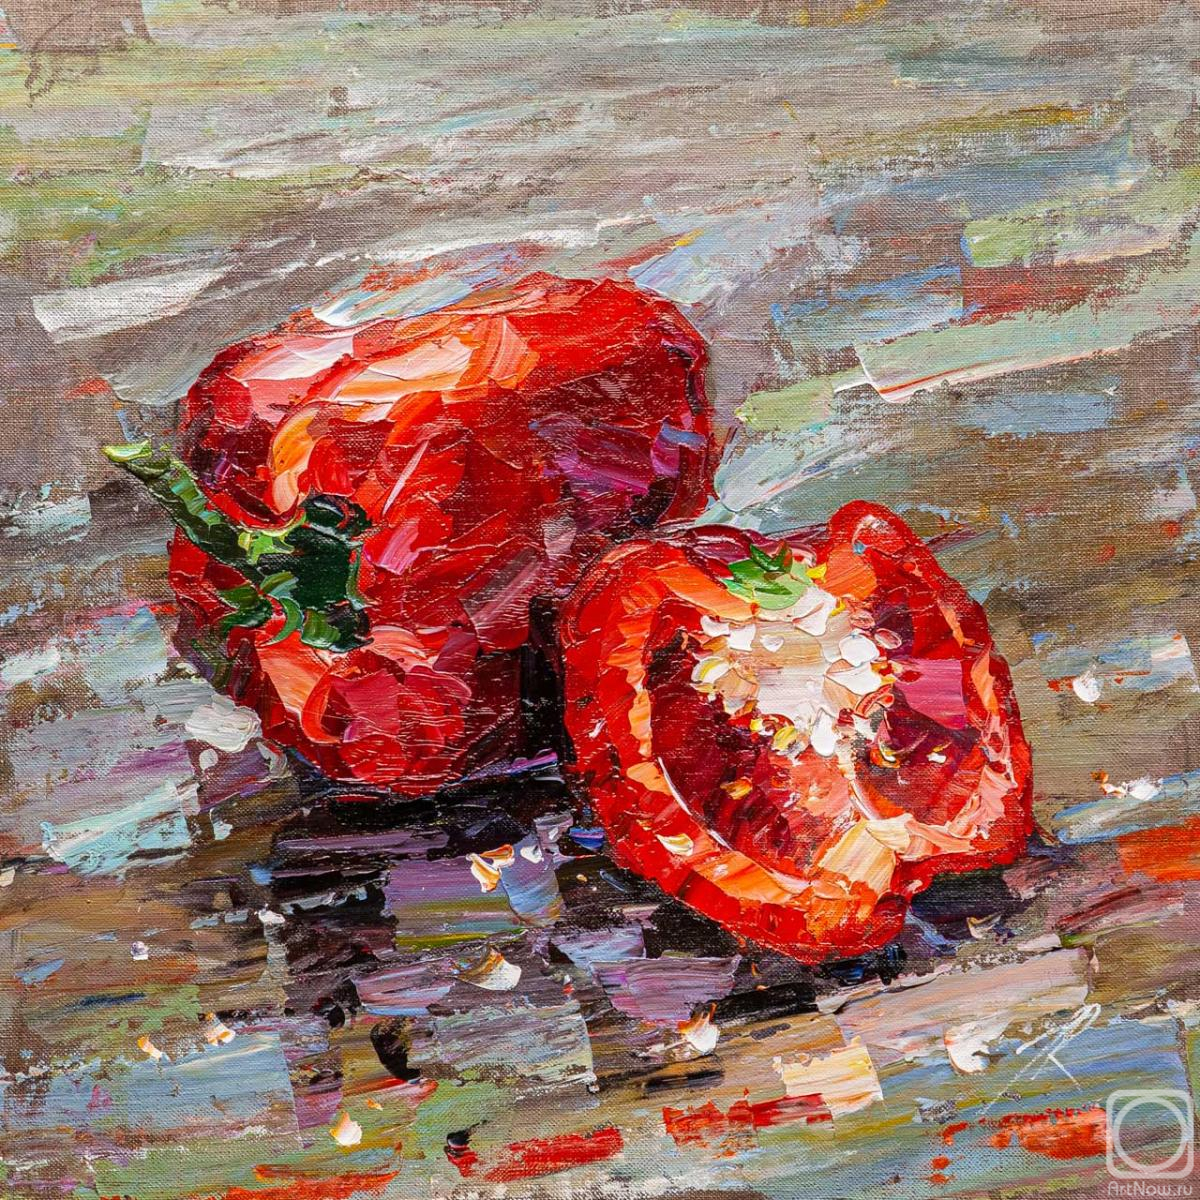 Rodries Jose. Red peppers